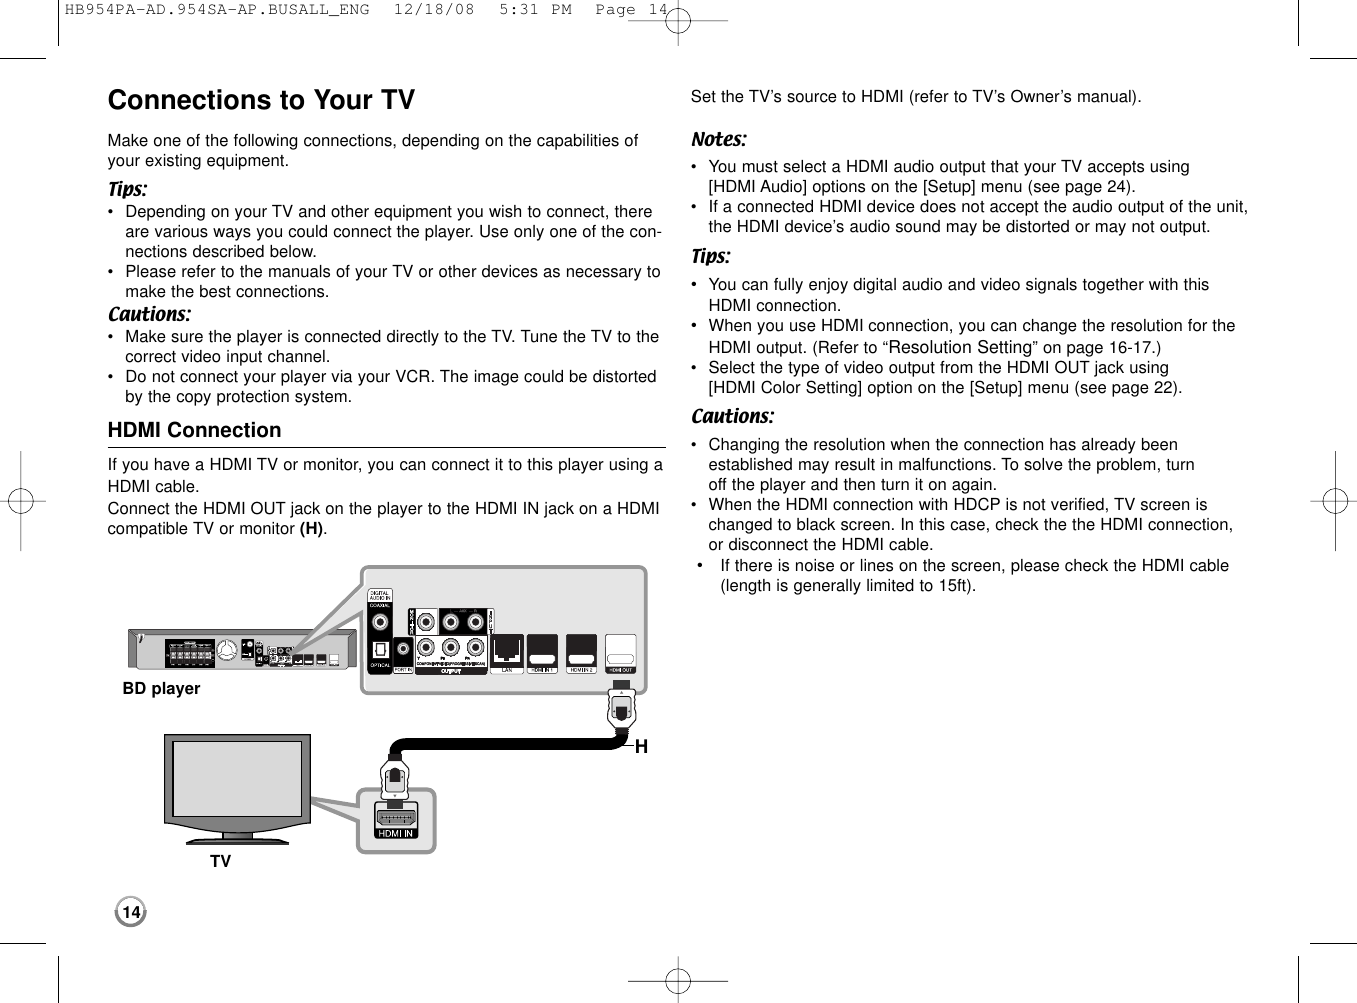 14Connections to Your TVMake one of the following connections, depending on the capabilities ofyour existing equipment.Tips:•Depending on your TV and other equipment you wish to connect, thereare various ways you could connect the player. Use only one of the con-nections described below.•Please refer to the manuals of your TV or other devices as necessary tomake the best connections.Cautions:•Make sure the player is connected directly to the TV. Tune the TV to thecorrect video input channel.•Do not connect your player via your VCR. The image could be distortedby the copy protection system.HDMI ConnectionIf you have a HDMI TV or monitor, you can connect it to this player using aHDMI cable.Connect the HDMI OUT jack on the player to the HDMI IN jack on a HDMI compatible TV or monitor (H).Set the TV’s source to HDMI (refer to TV’s Owner’s manual).Notes:•You must select a HDMI audio output that your TV accepts using [HDMI Audio] options on the [Setup] menu (see page 24). •If a connected HDMI device does not accept the audio output of the unit,the HDMI device’s audio sound may be distorted or may not output. Tips:•You can fully enjoy digital audio and video signals together with thisHDMI connection.•When you use HDMI connection, you can change the resolution for theHDMI output. (Refer to “Resolution Setting” on page 16-17.)•Select the type of video output from the HDMI OUT jack using [HDMI Color Setting] option on the [Setup] menu (see page 22). Cautions:•Changing the resolution when the connection has already been established may result in malfunctions. To solve the problem, turn off the player and then turn it on again.•When the HDMI connection with HDCP is not verified, TV screen ischanged to black screen. In this case, check the the HDMI connection,or disconnect the HDMI cable.•If there is noise or lines on the screen, please check the HDMI cable(length is generally limited to 15ft).HBD playerTVHB954PA-AD.954SA-AP.BUSALL_ENG  12/18/08  5:31 PM  Page 14